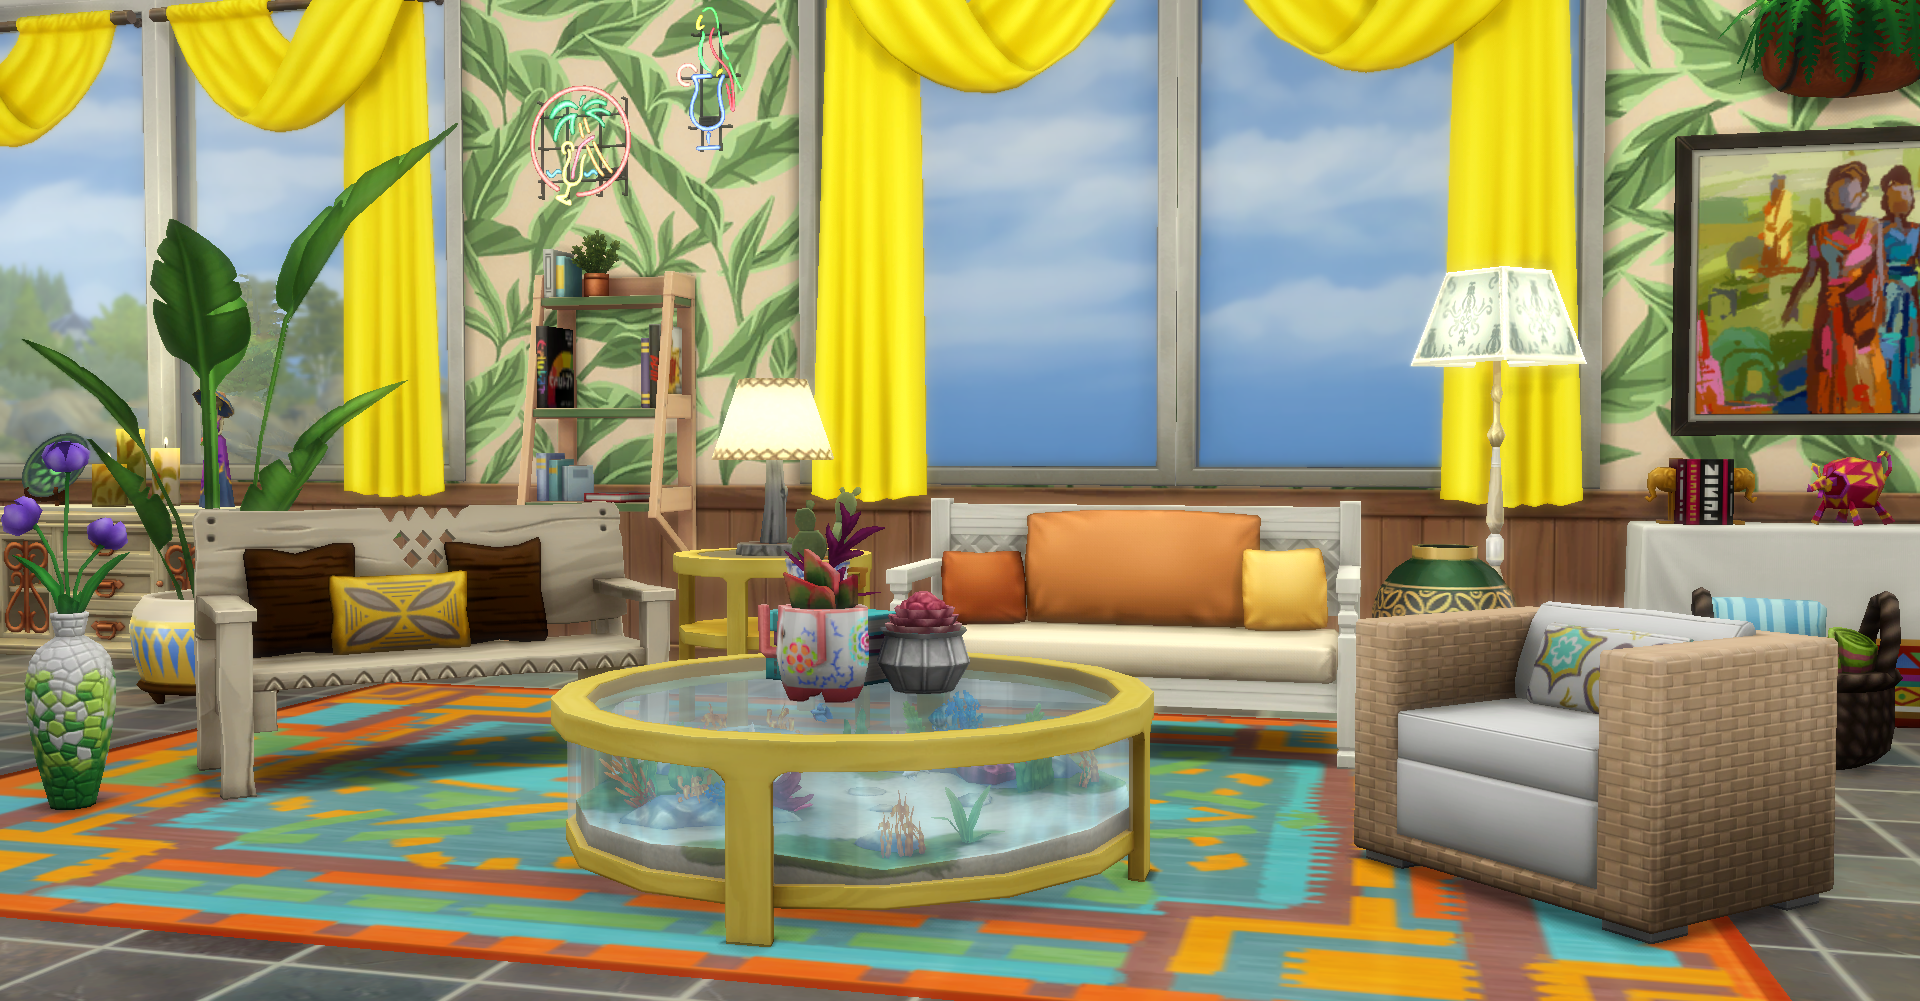 The Sims 4 Inspiration Corner Building For Island Living Simsvip